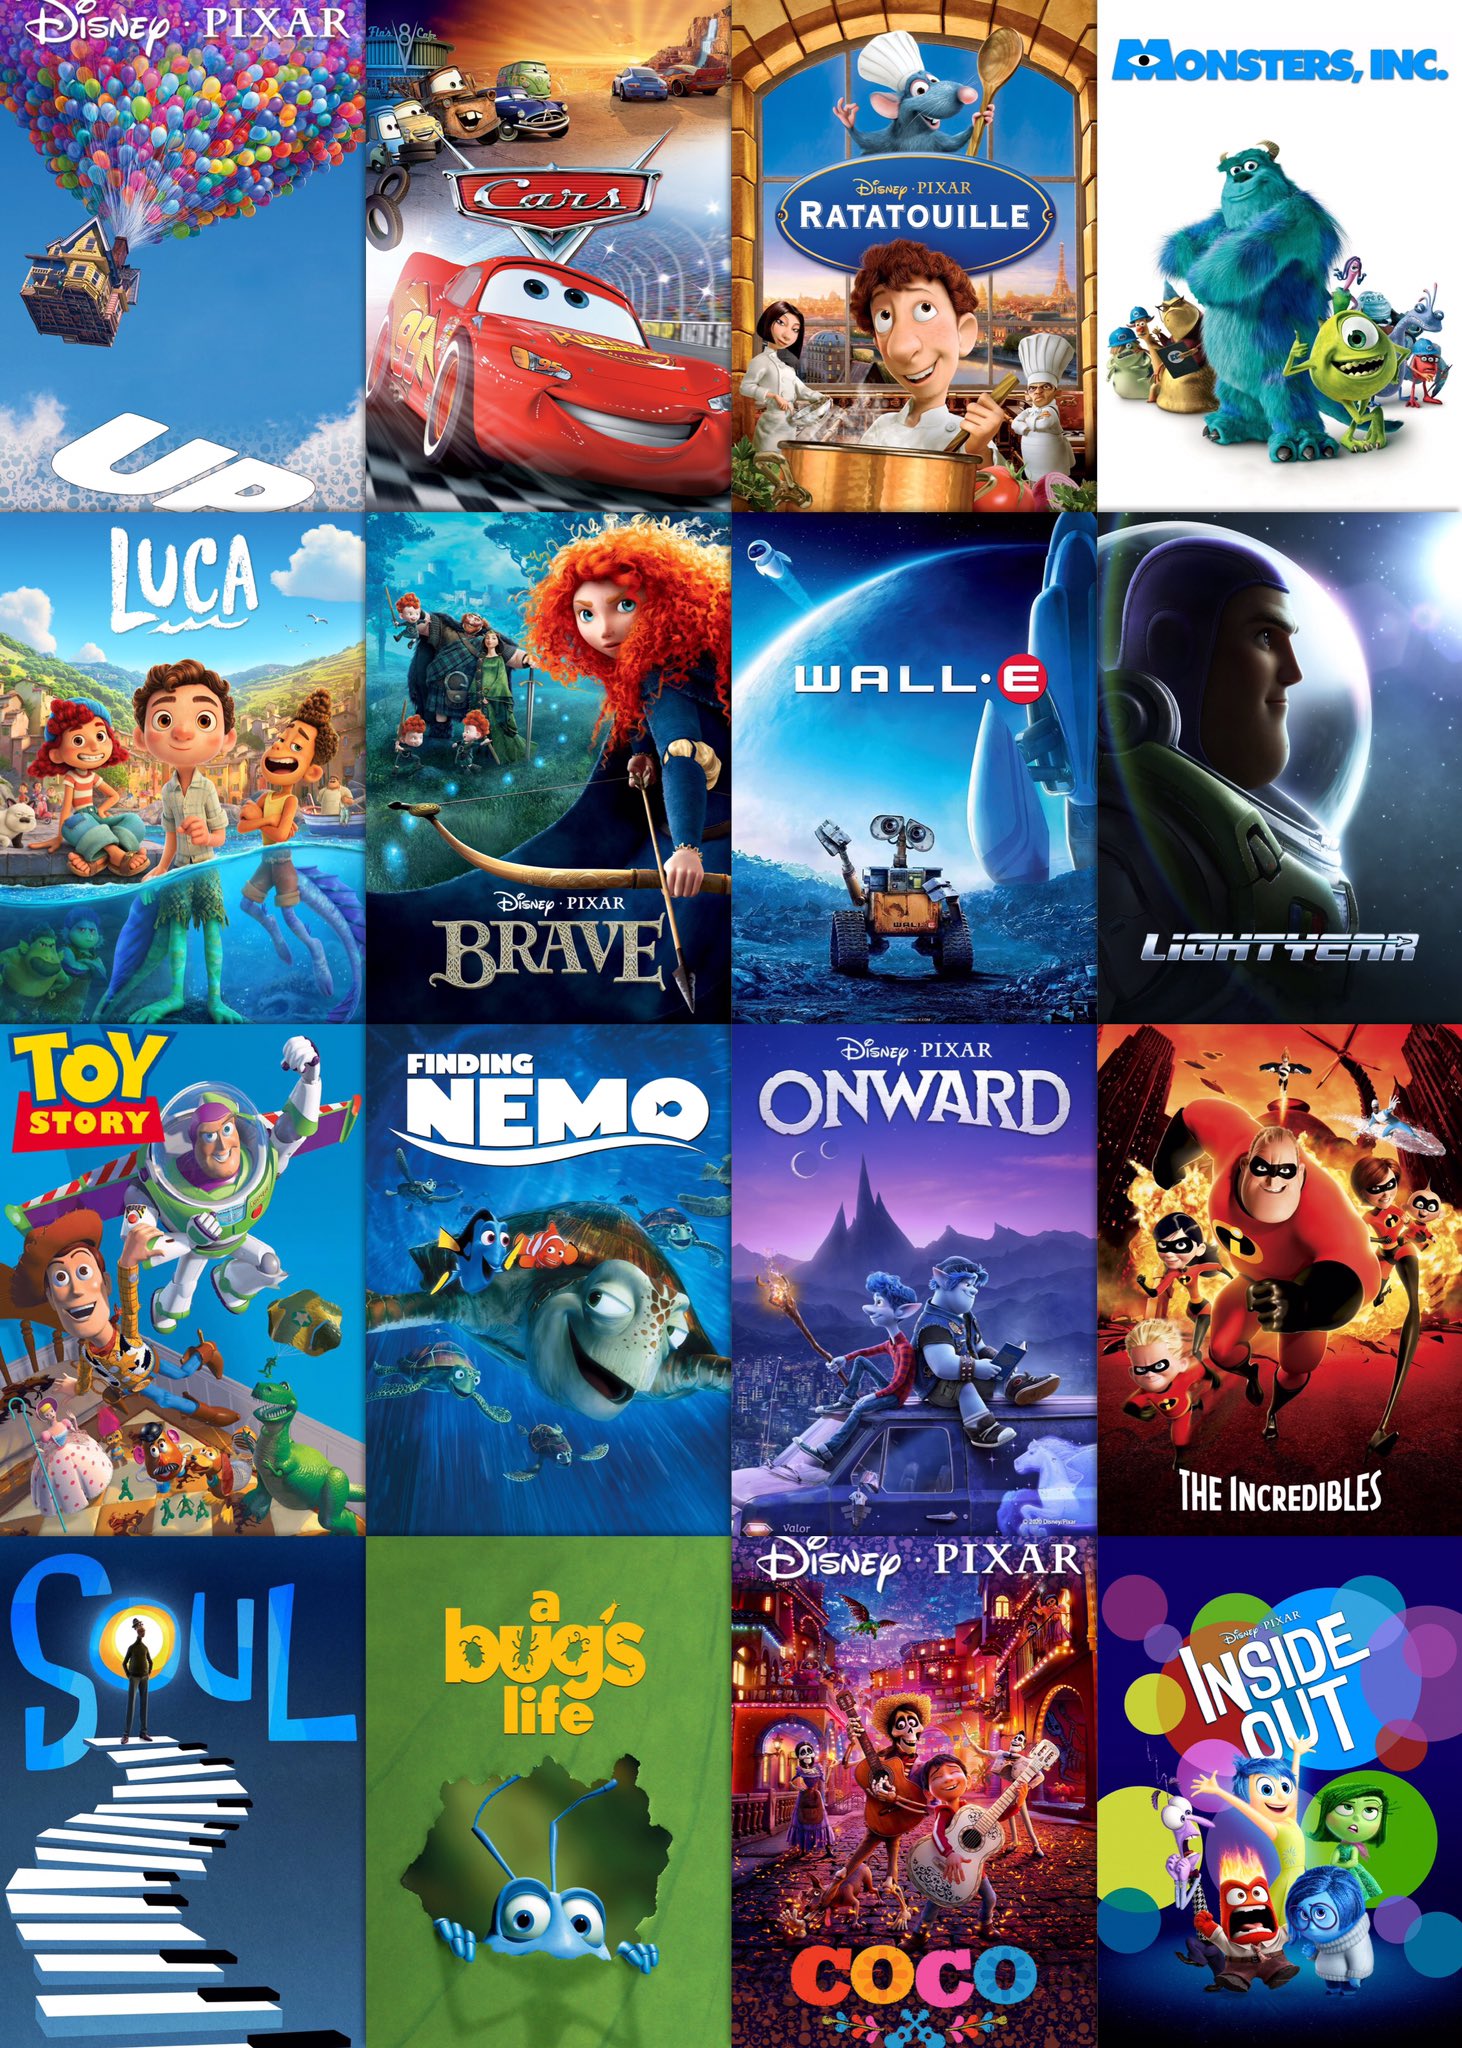 sugerir Año nuevo rigidez Rogue on Twitter: "16 Disney Pixar movies but you can only pick from each  row https://t.co/0TN2r4yshy" / Twitter